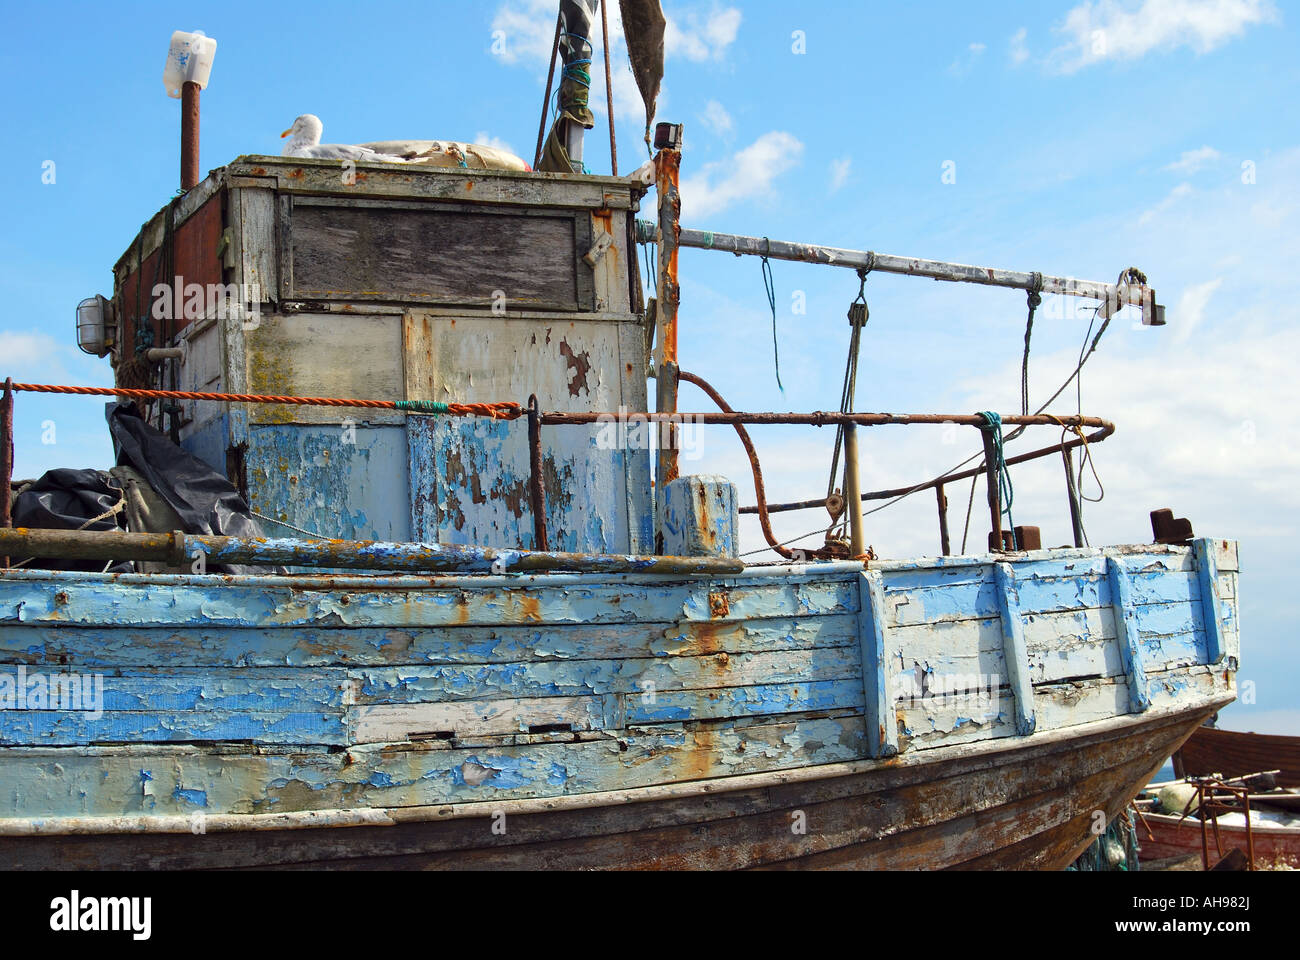 Old, abandoned fishing boat, The Stade, Hastings Old Town, Hastings, East Sussex, England, United Kingdom Stock Photo